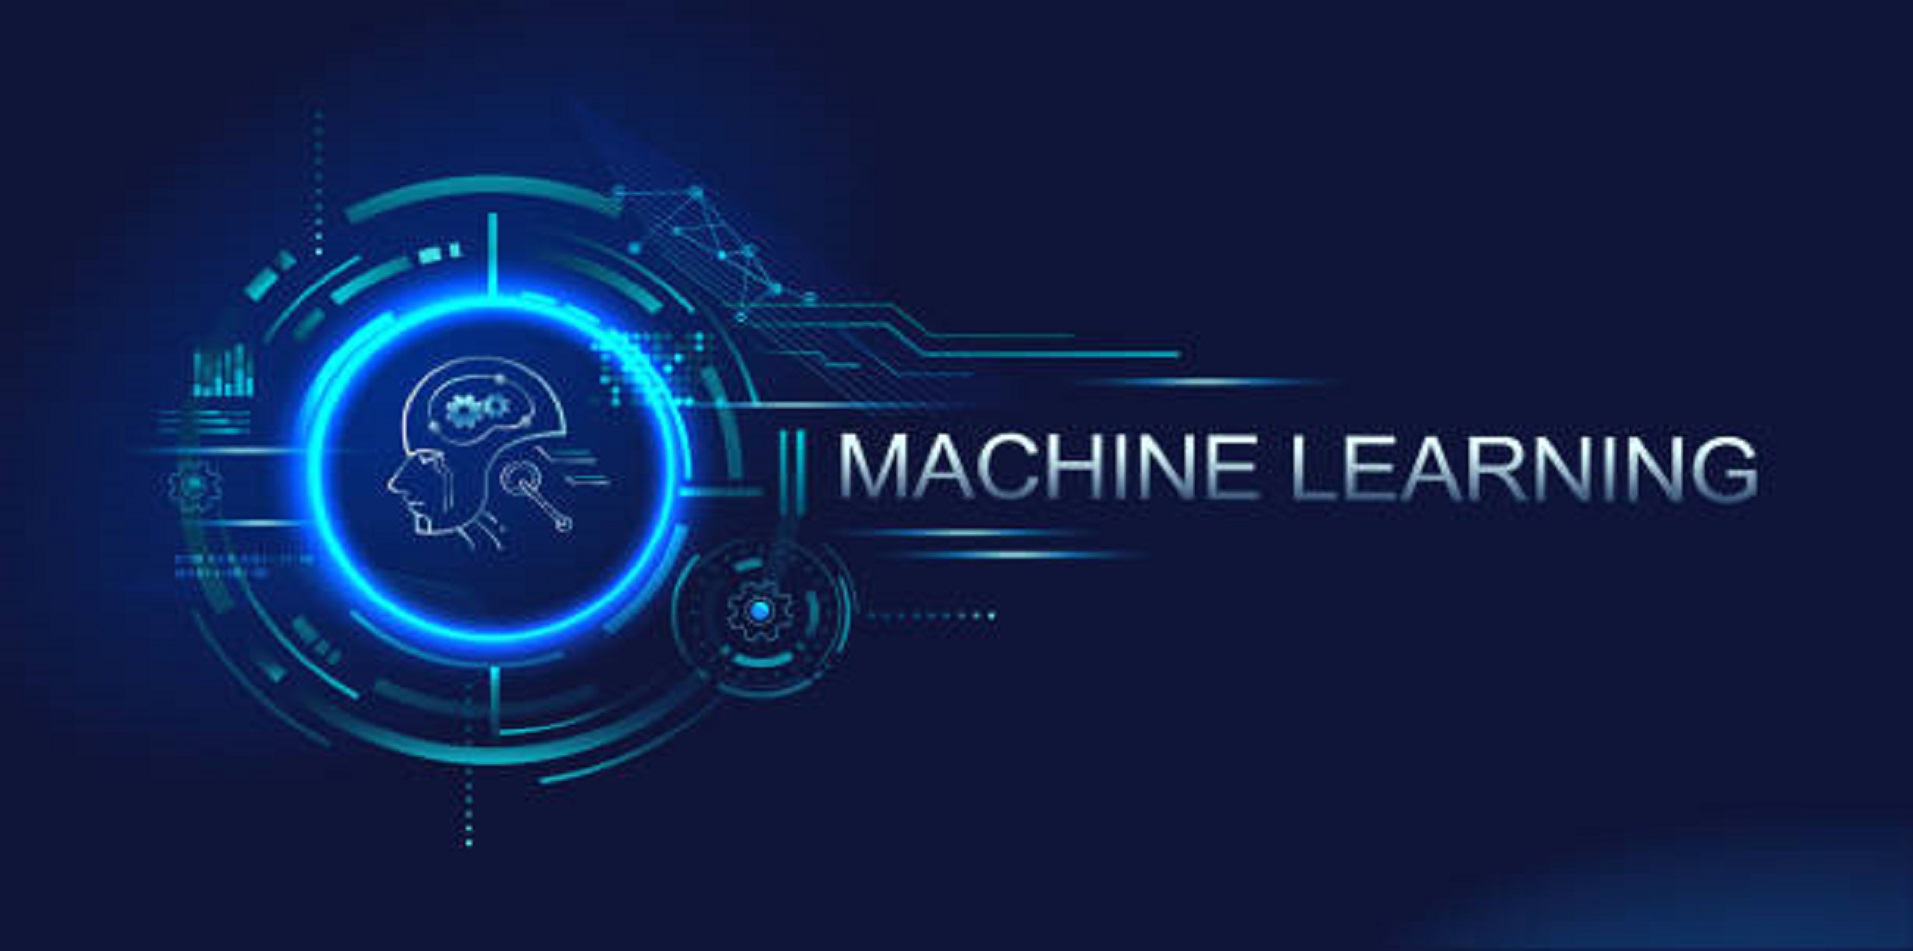 Top Machine Learning Trends